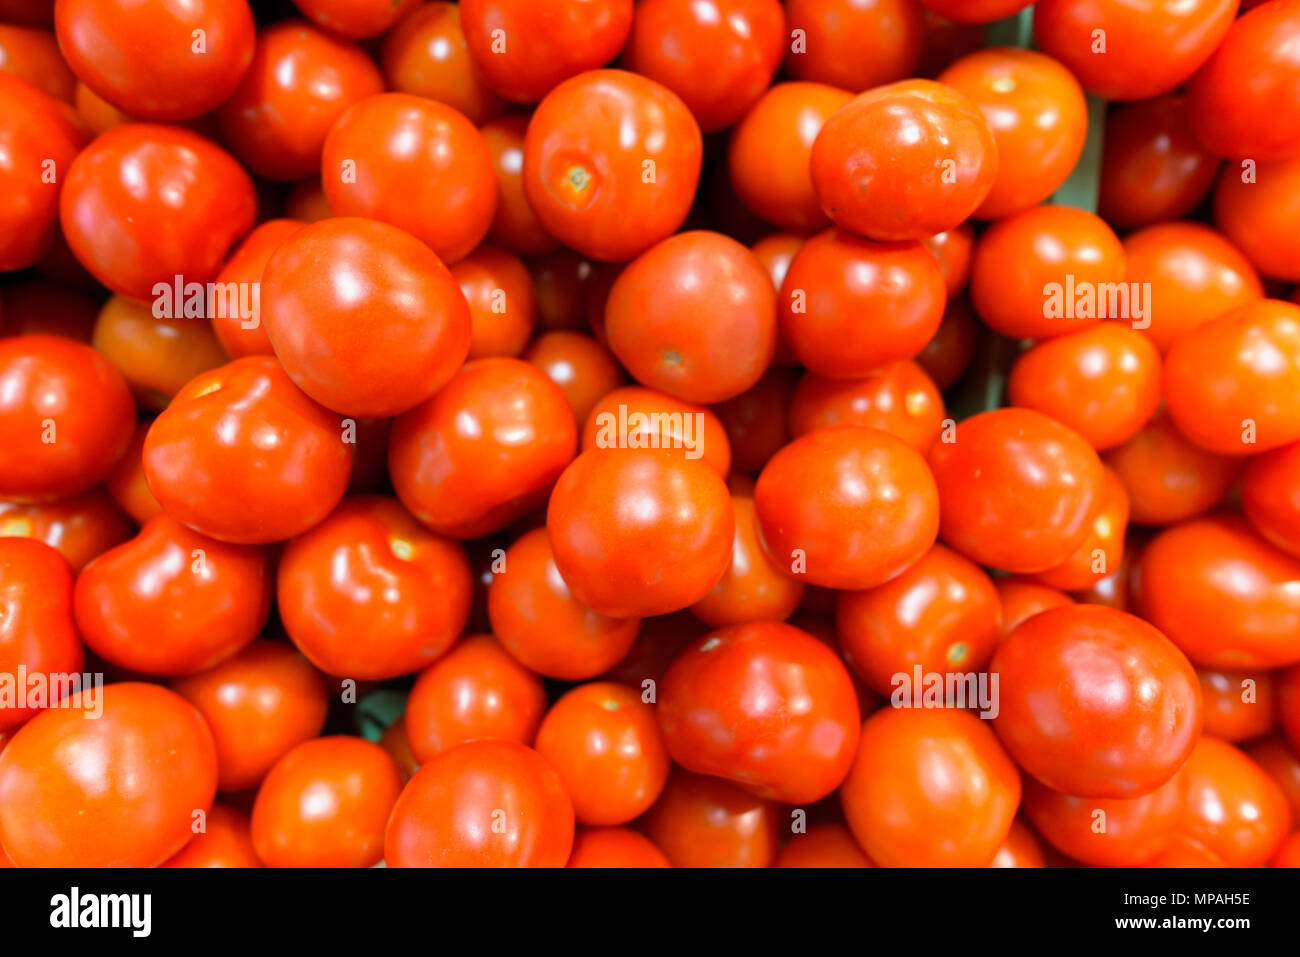 Directly Above Shot Of Tomatoes Stock Photo